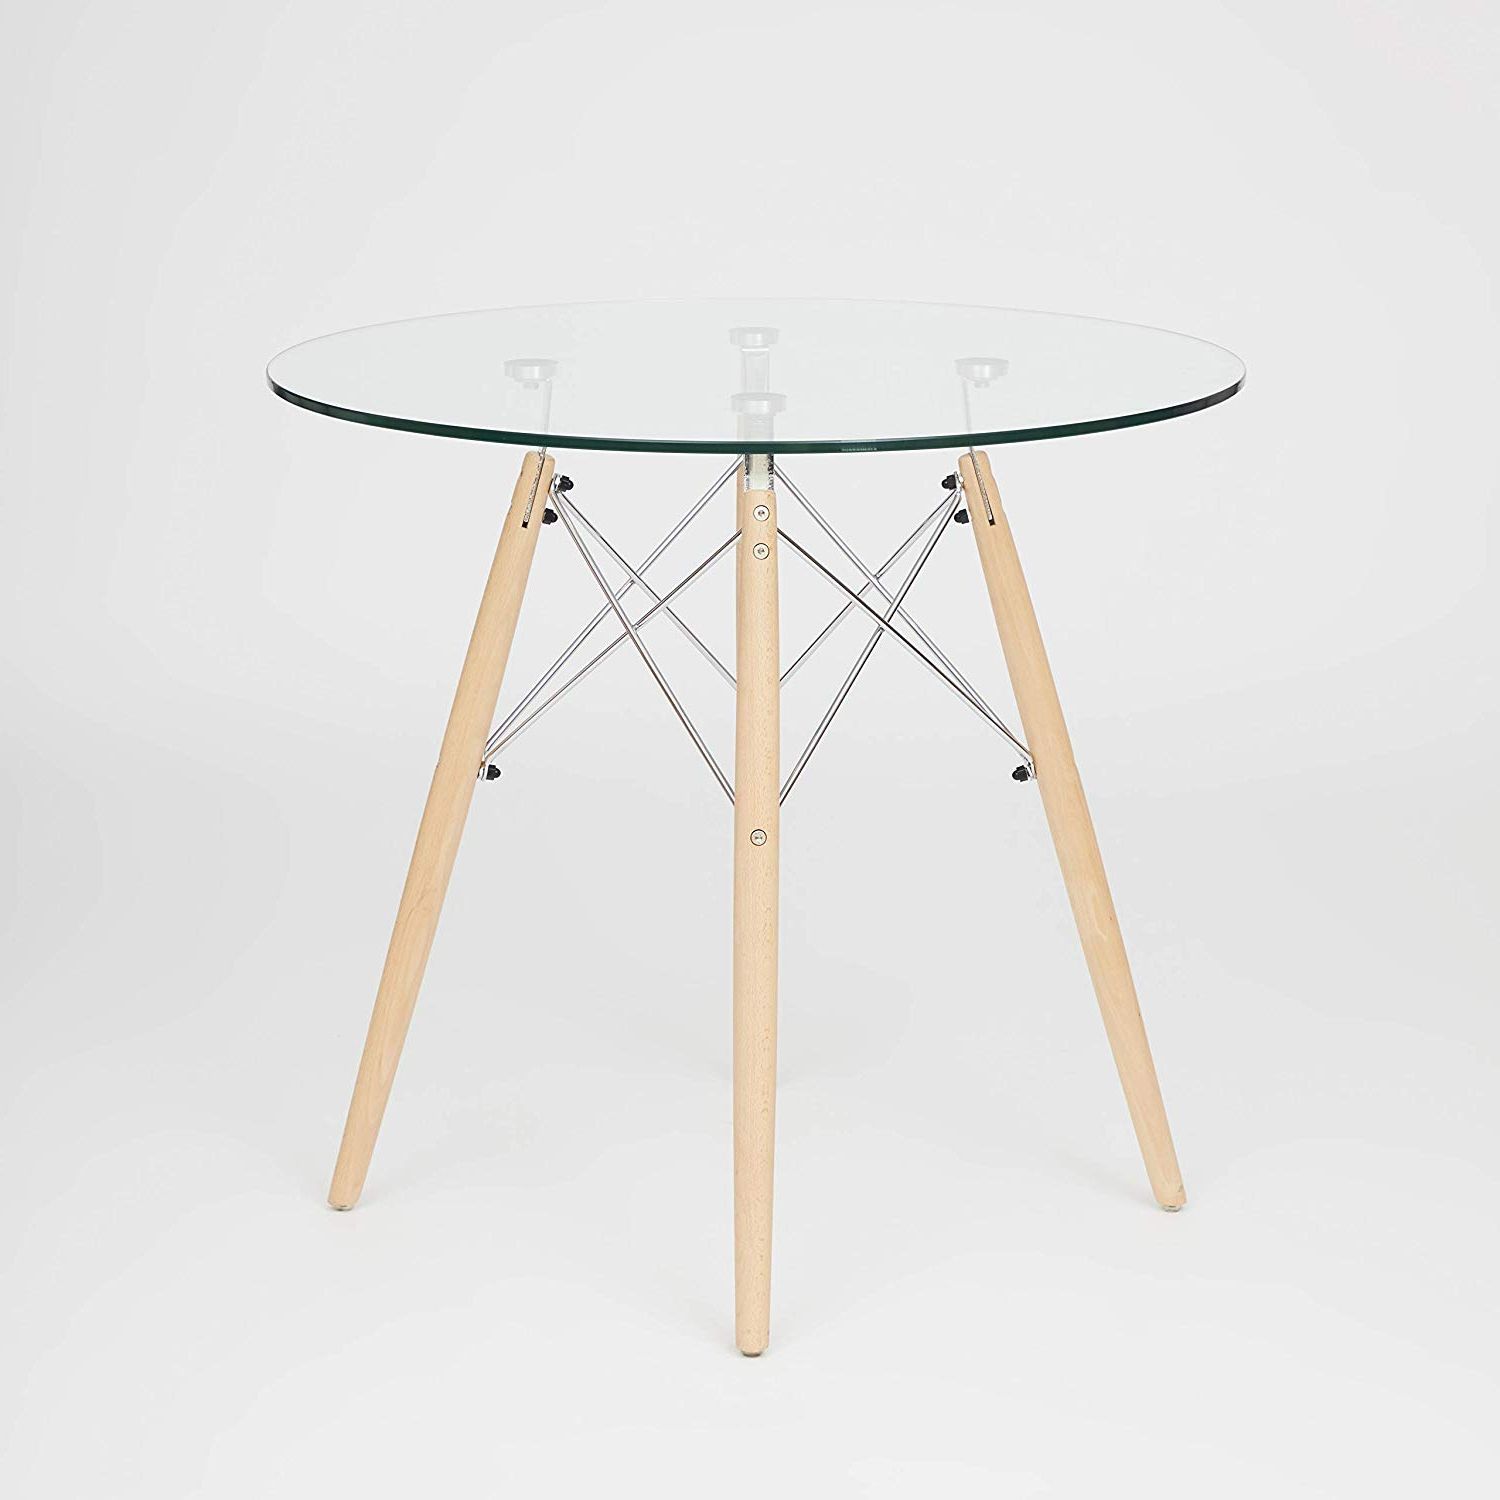 Trendy Retro Round Glasstop Dining Tables Pertaining To Ochs Dining Table Glass Round Top With Eiffel Retro Wooden (View 16 of 25)